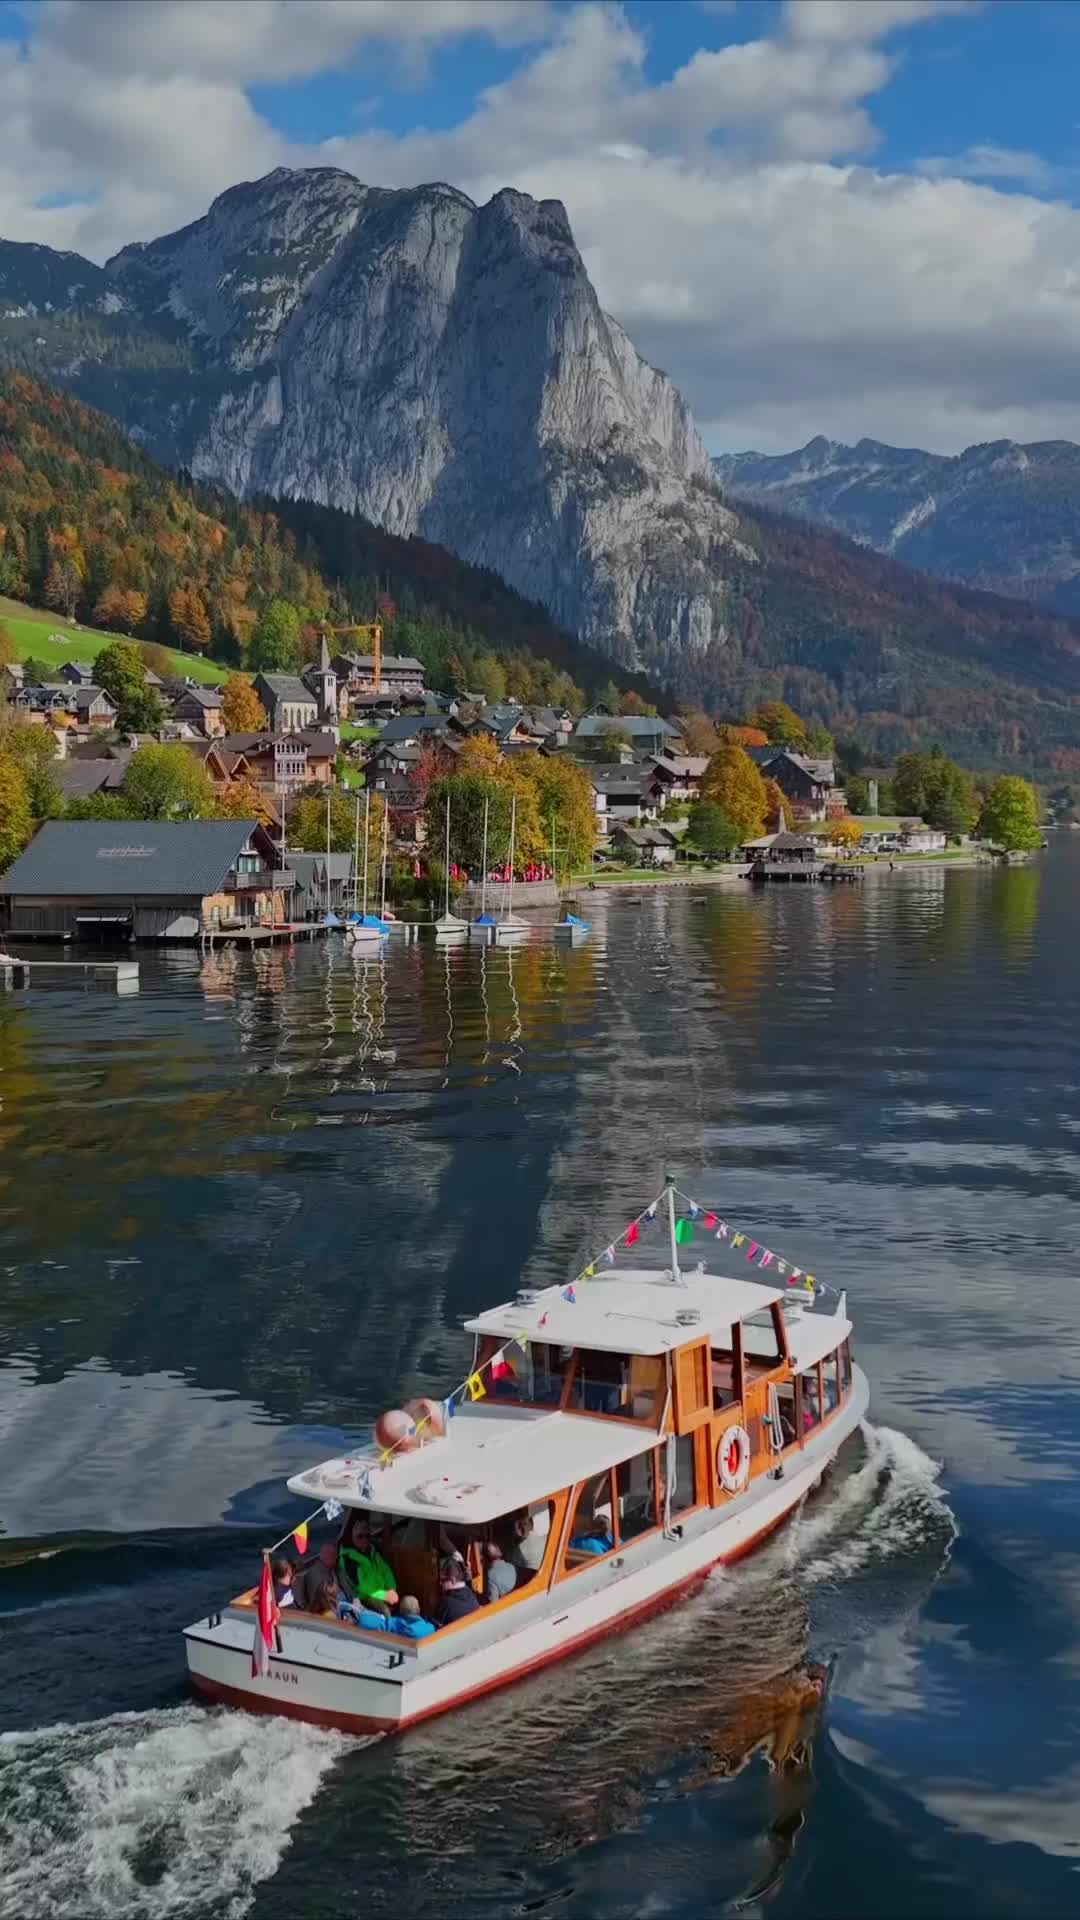 📍Grundlsee Austria 🇦🇹 How to get there👇

🚗 By CAR 

ℹ️ The community Grundlsee is located in Ausseerland in the Styrian Salzkammergut in the district of Liezen, Styria. Grundlsee is located at 732 m above sea level directly on the Grundlsee on the southwestern edge of the Totes Gebirge.

🏷️ Tag someone you want to go here with

⏰ Time visited November 

💈Activities that you can do there, go with the boat around the lake

📌SAVE IT FOR YOUR NEXT TRIP IN AUSTRIA

👍 FOLLOW @d.tzankatian FOR YOUR NEXT TRAVEL BUCKET LIST LOCATIONS

✅ MORE INFORMATION ABOUT LOCATIONS ➡️ MY IG STORIES, IG HIGHLIGHTS, IG REELS

#austria #austria🇦🇹 #austria_memories #áustria #austriavacations #austriagram #visitaustria #grundlsee #travelphotography #travelblogger #travelgram #traveler #lakelife #tourboat #calmness #nature #naturephotography #dronephotography #dronephoto #igreel #reelsinstagram #europetravel #europe_vacations #europedestinations #incredible_europe #austriavacations #wonderful_places #earthoutdoors #travelphotography